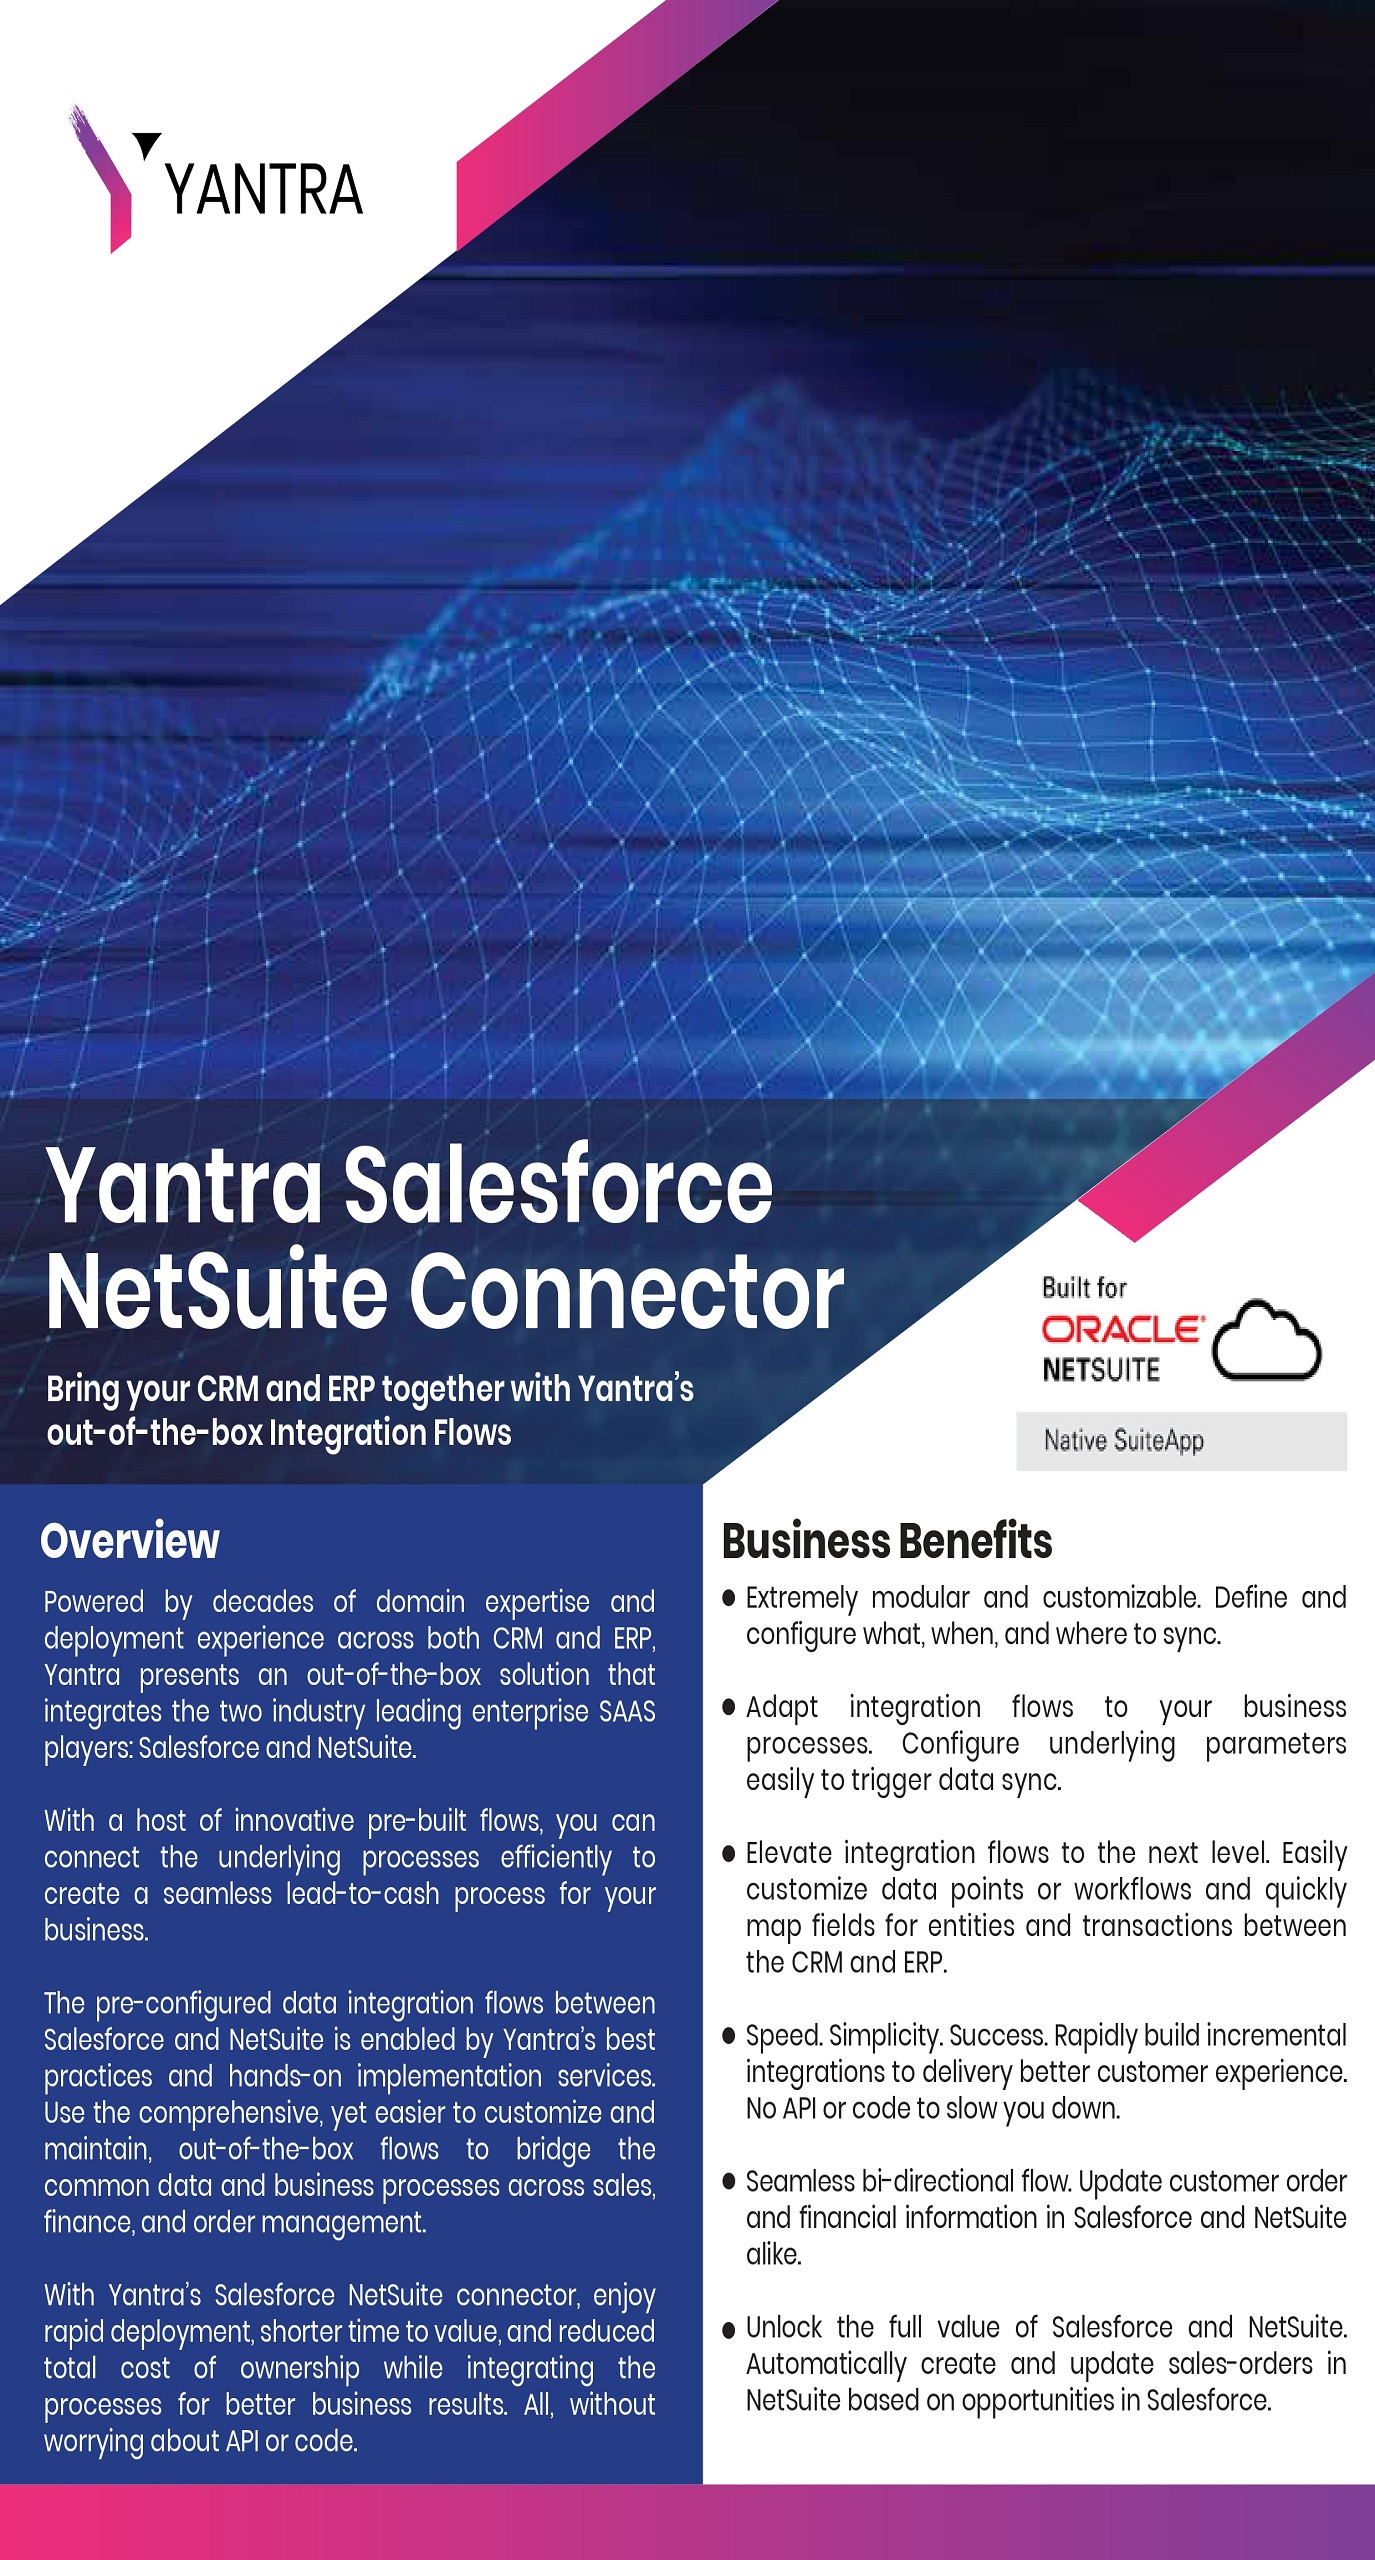 NetSuite Connector